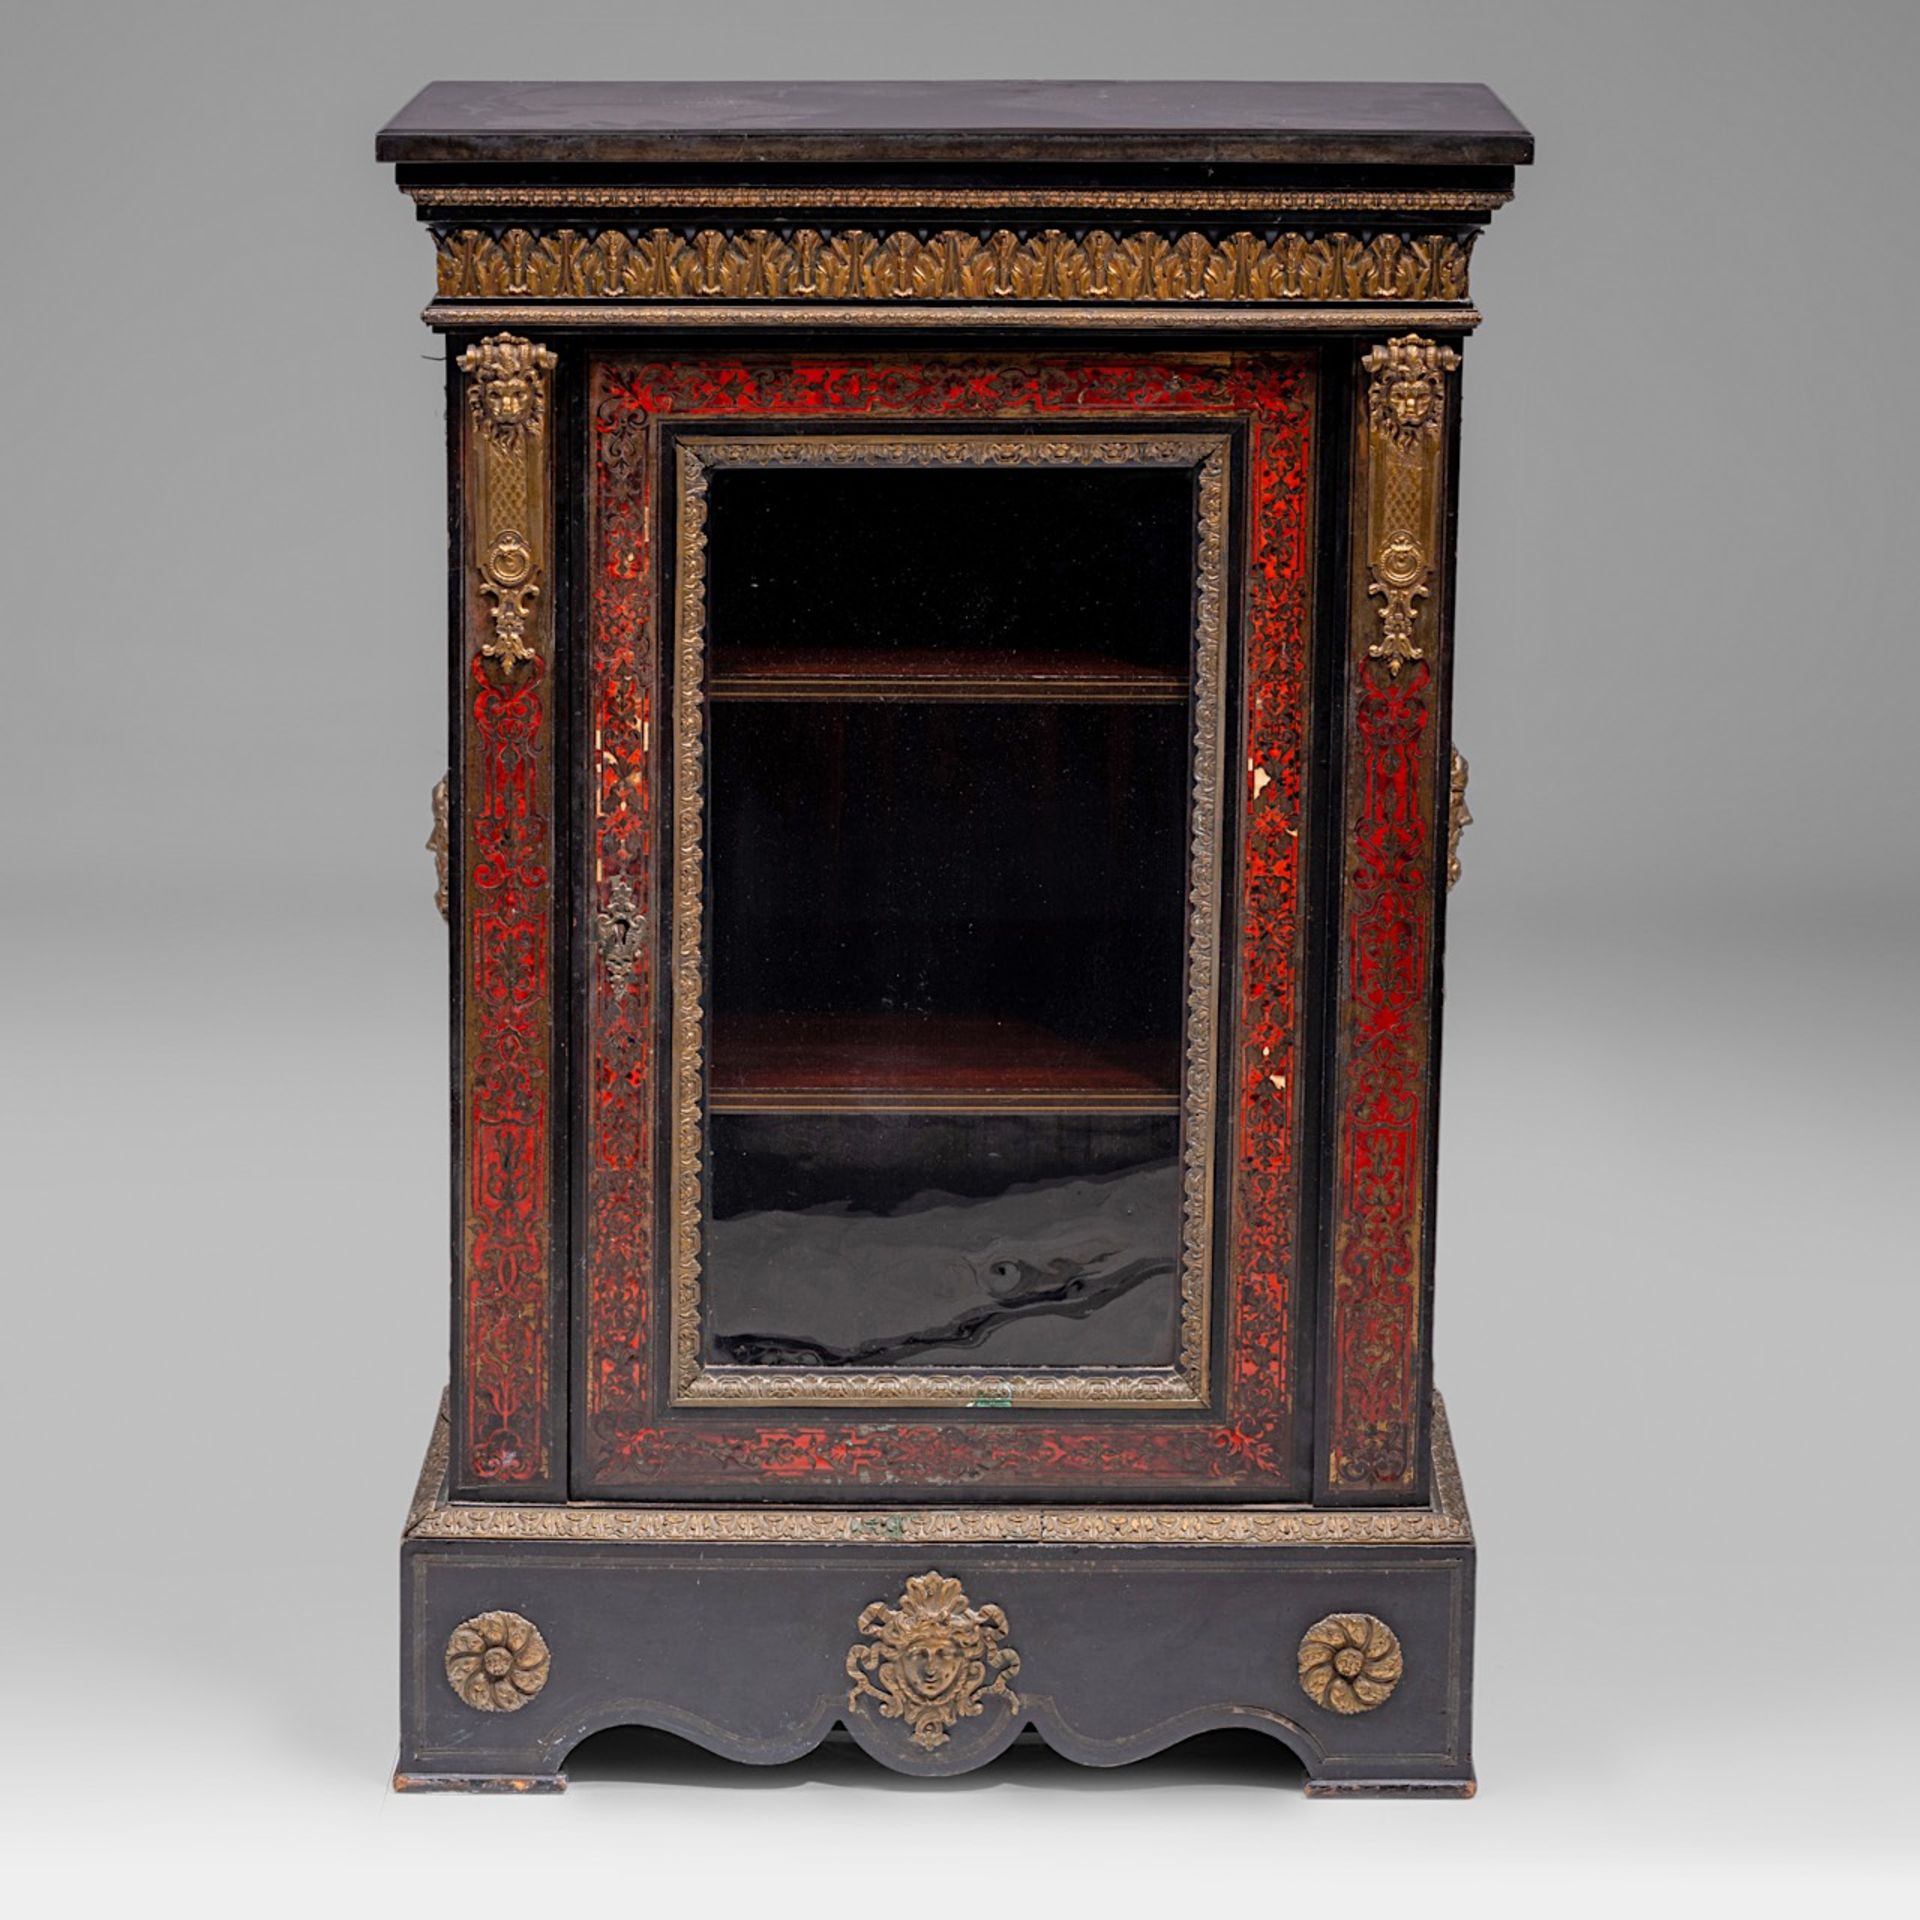 A Napoleon III Boulle work display cabinet by Hippolyte-Edme Pretot (1812-1855), H 111 - W 73,5 - D - Image 2 of 9